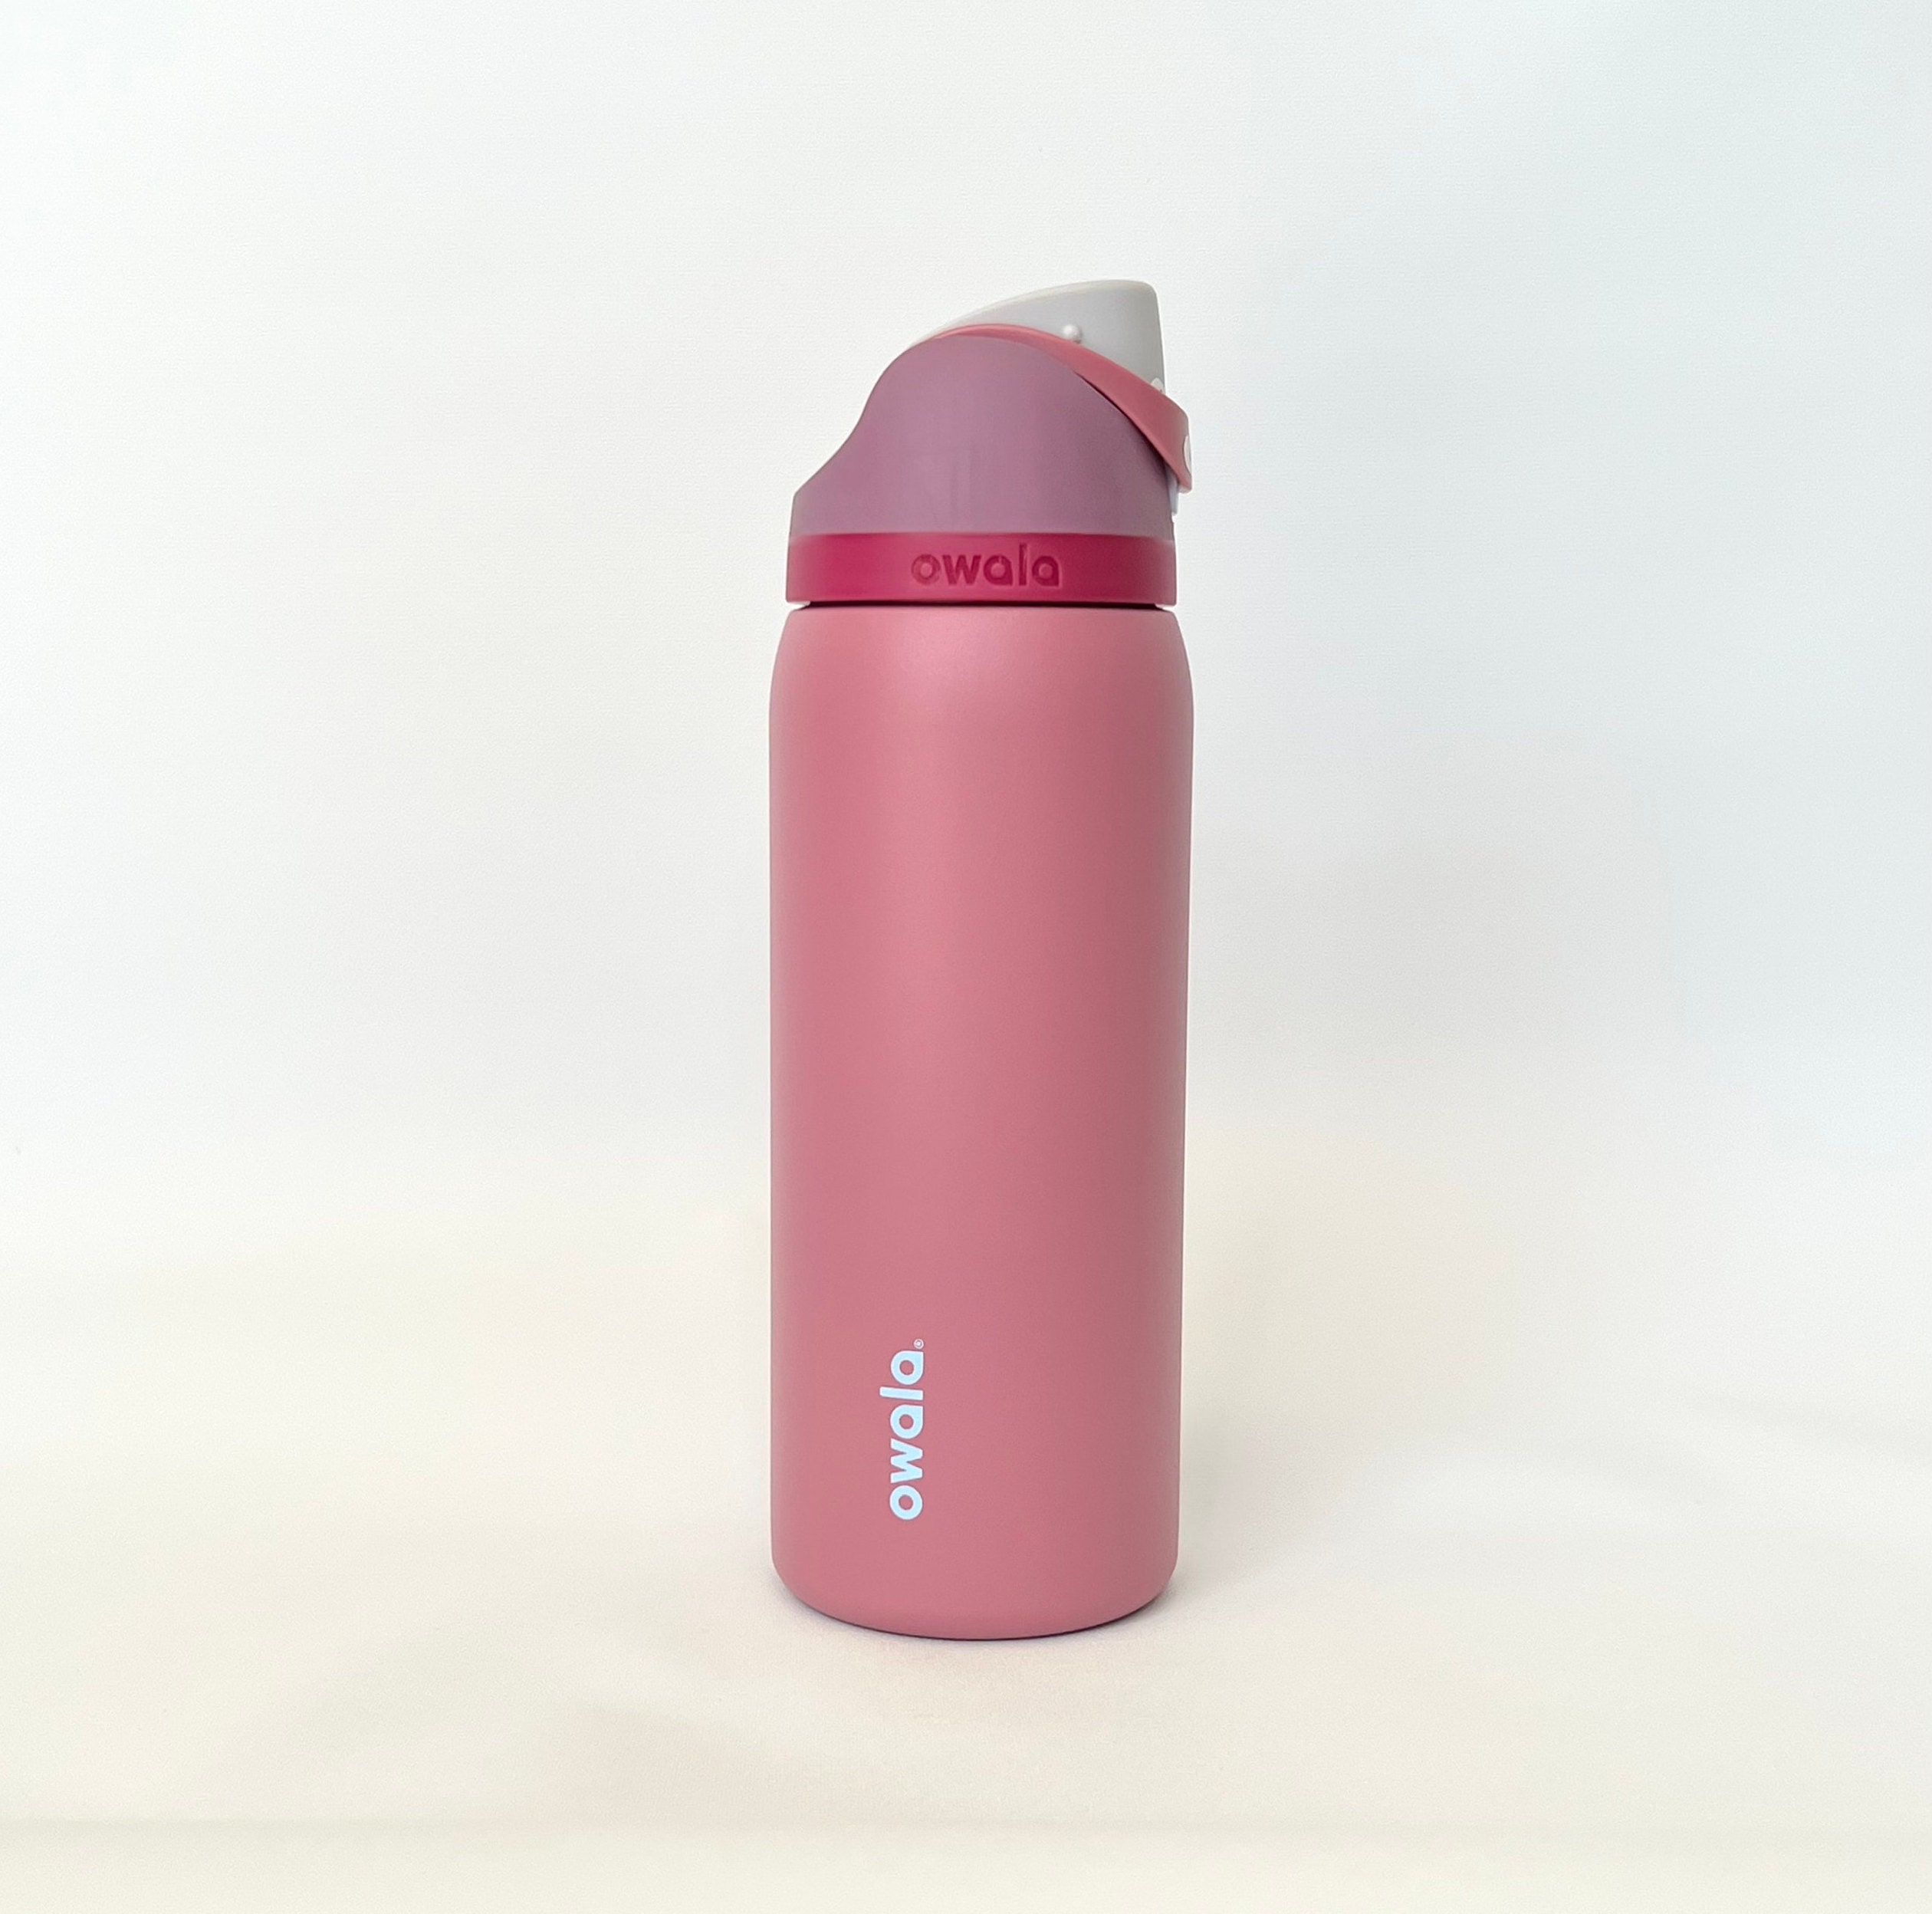 Owala Smooth Sip 20 oz Water Bottle  Urban Outfitters Mexico - Clothing,  Music, Home & Accessories